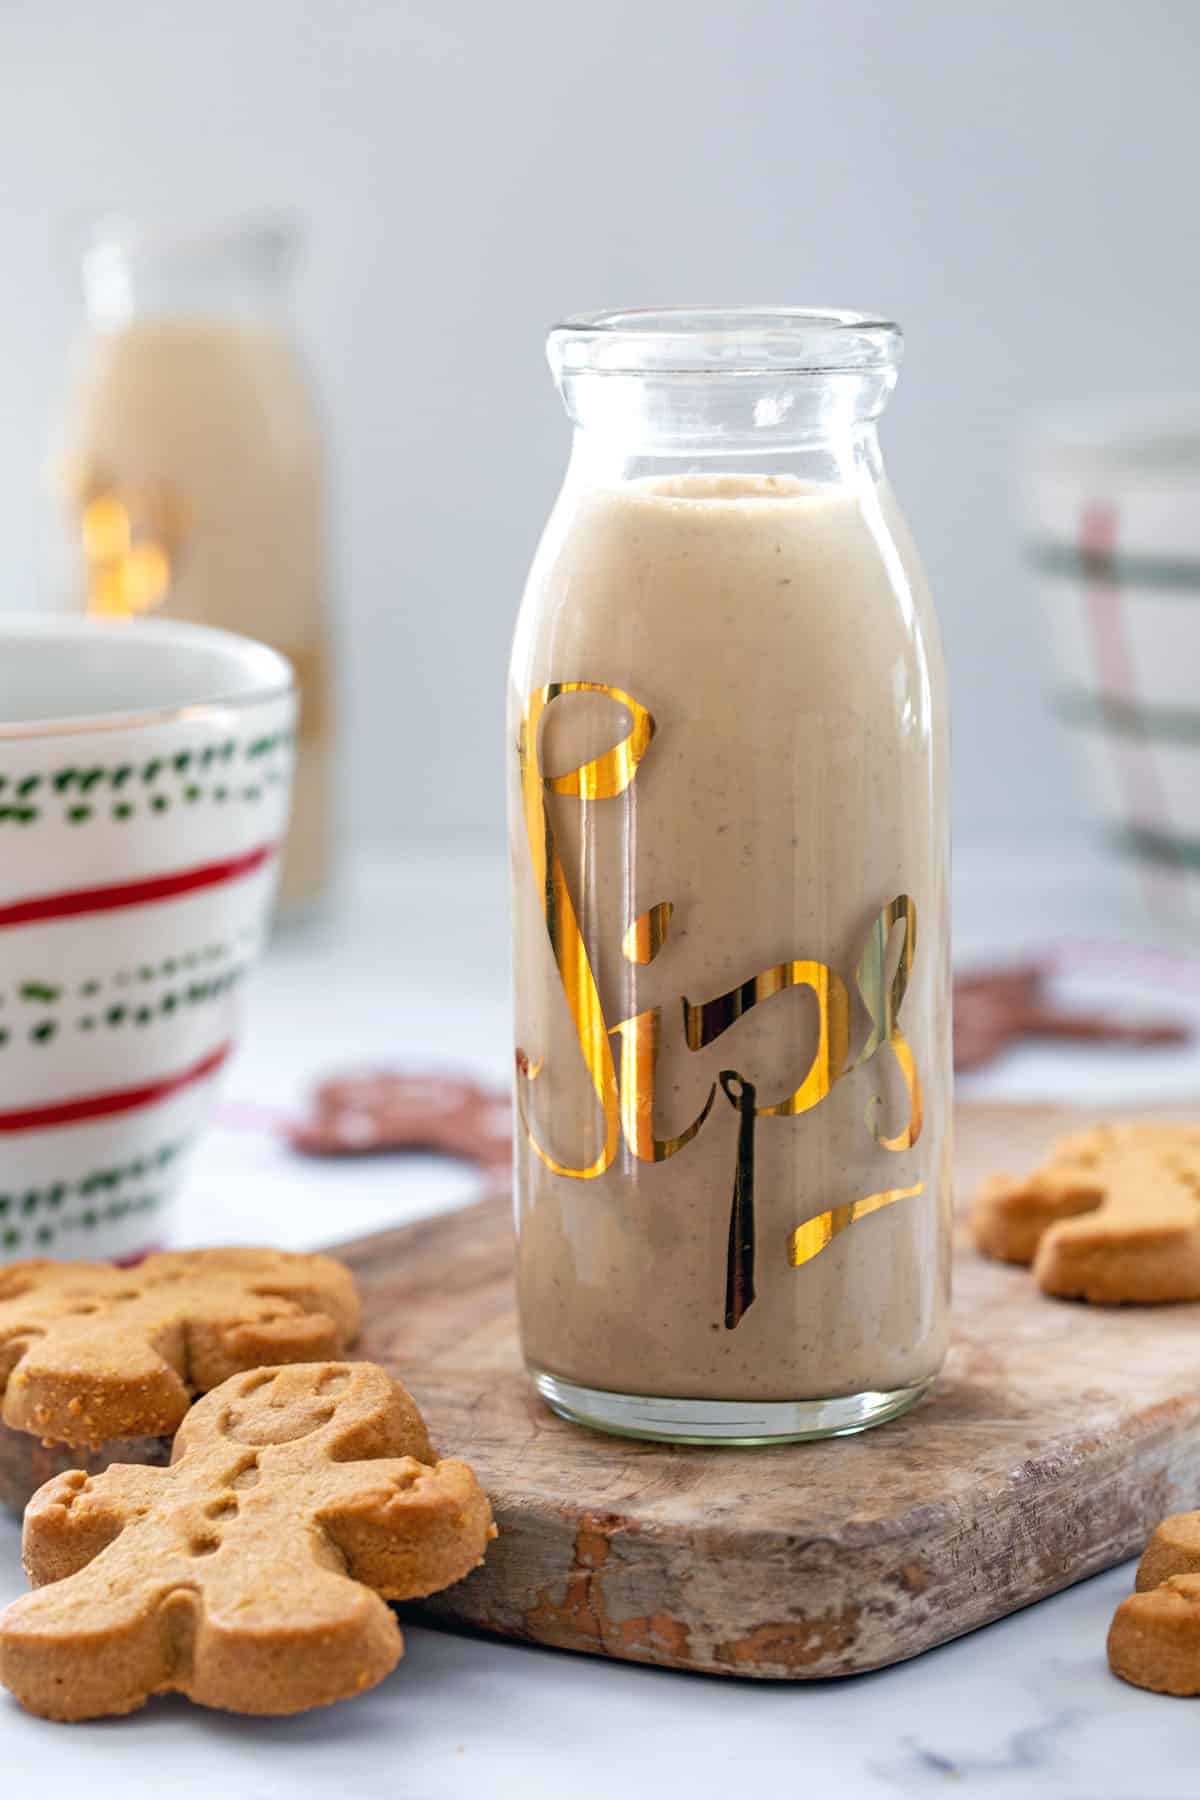 Head-on view of a carafe of gingerbread coffee creamer with coffee cups and gingerbread men cookies around.